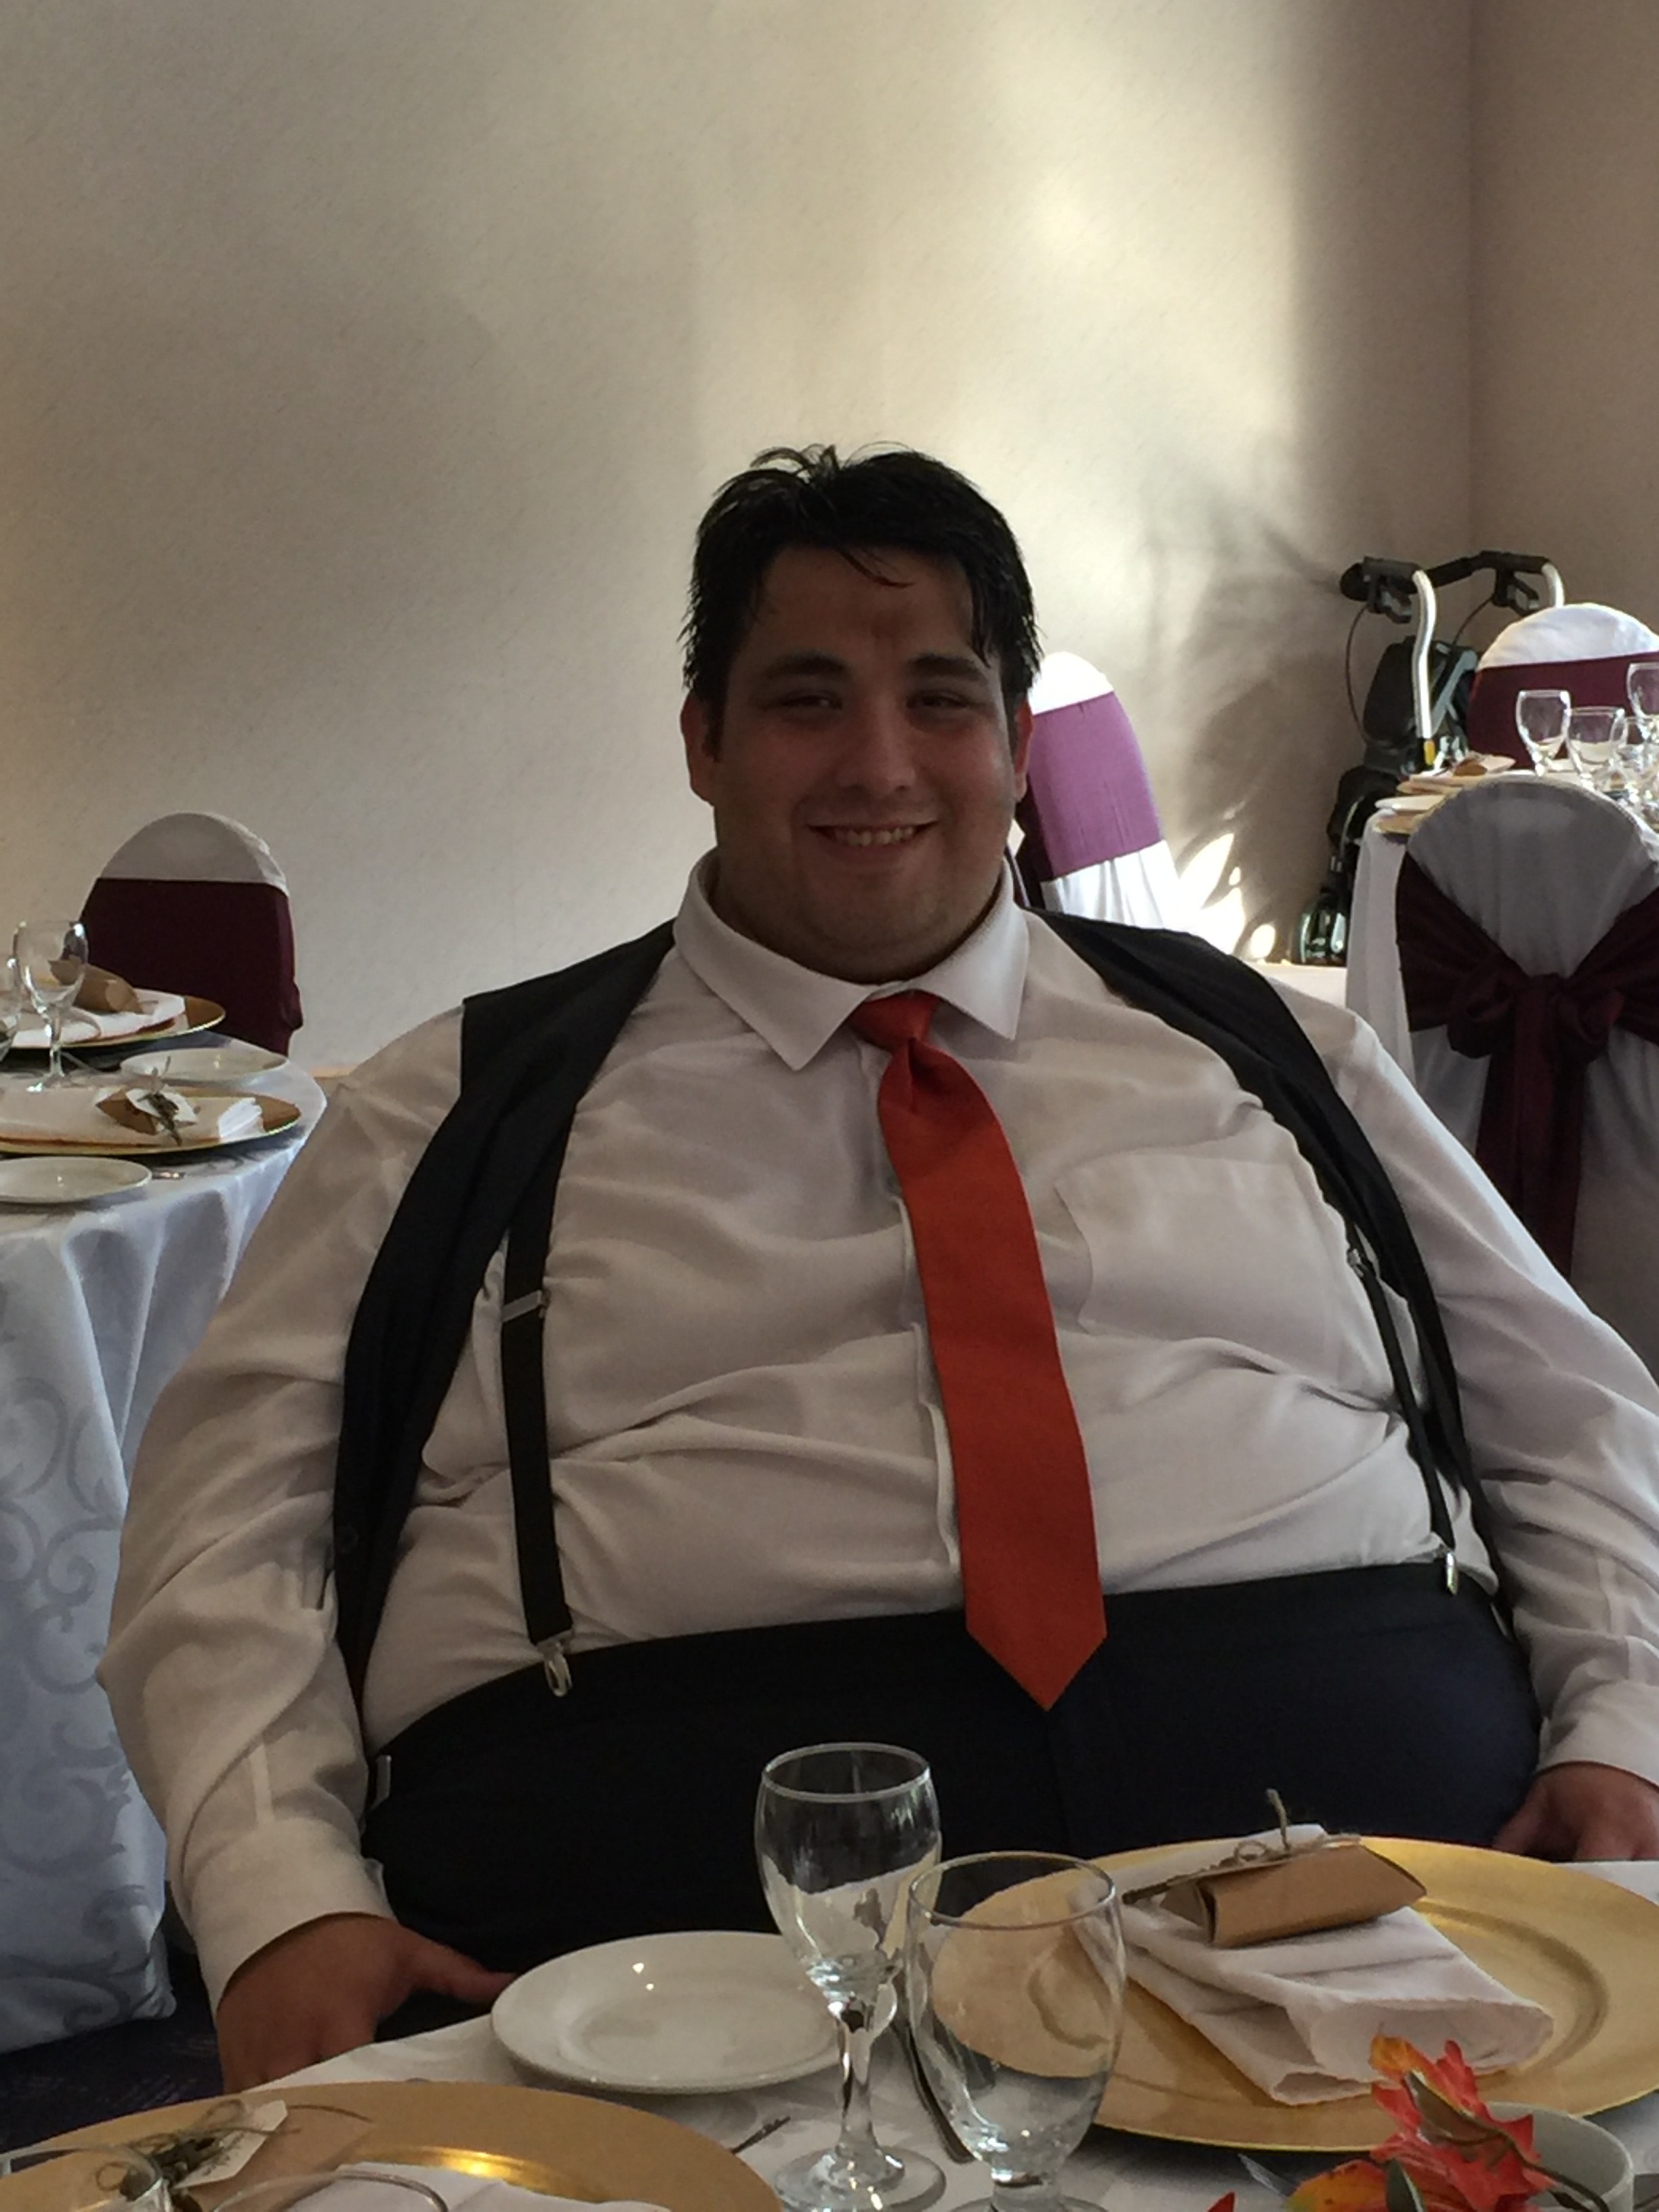 Bigfattybc On Twitter Fatty At A Wedding Do I Look Good P Yes It S An Old Picture I Am Much